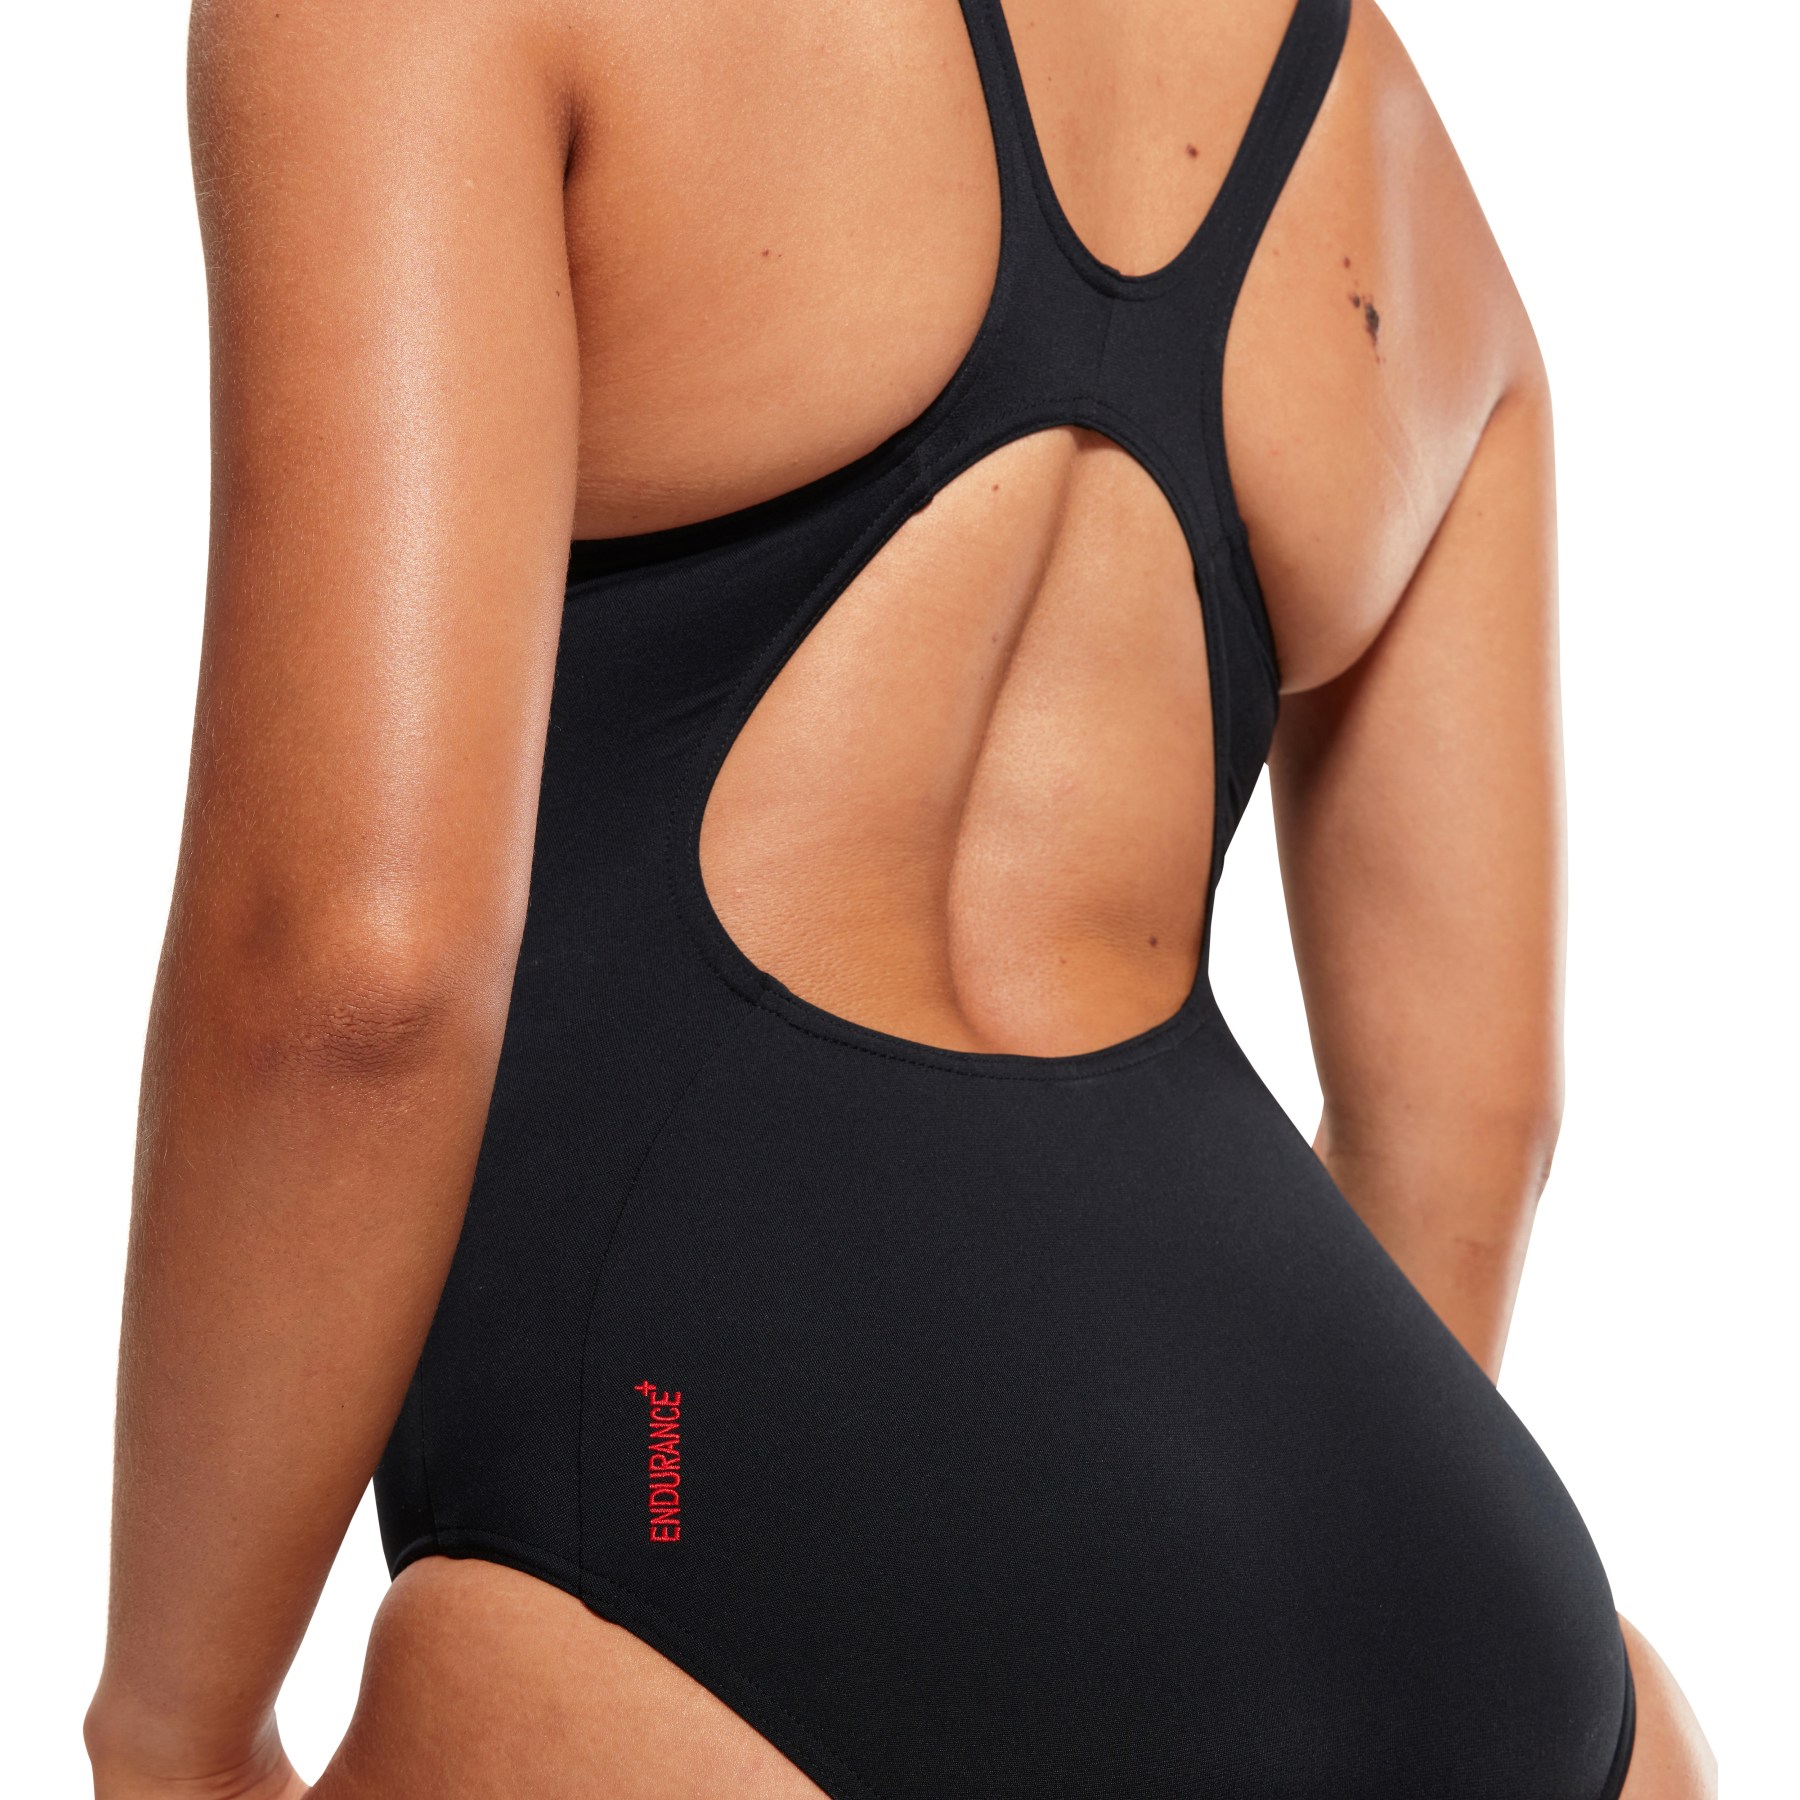 Speedo Placement Muscleback Bathing Suit - black/fed red/chroma blue |  BIKE24